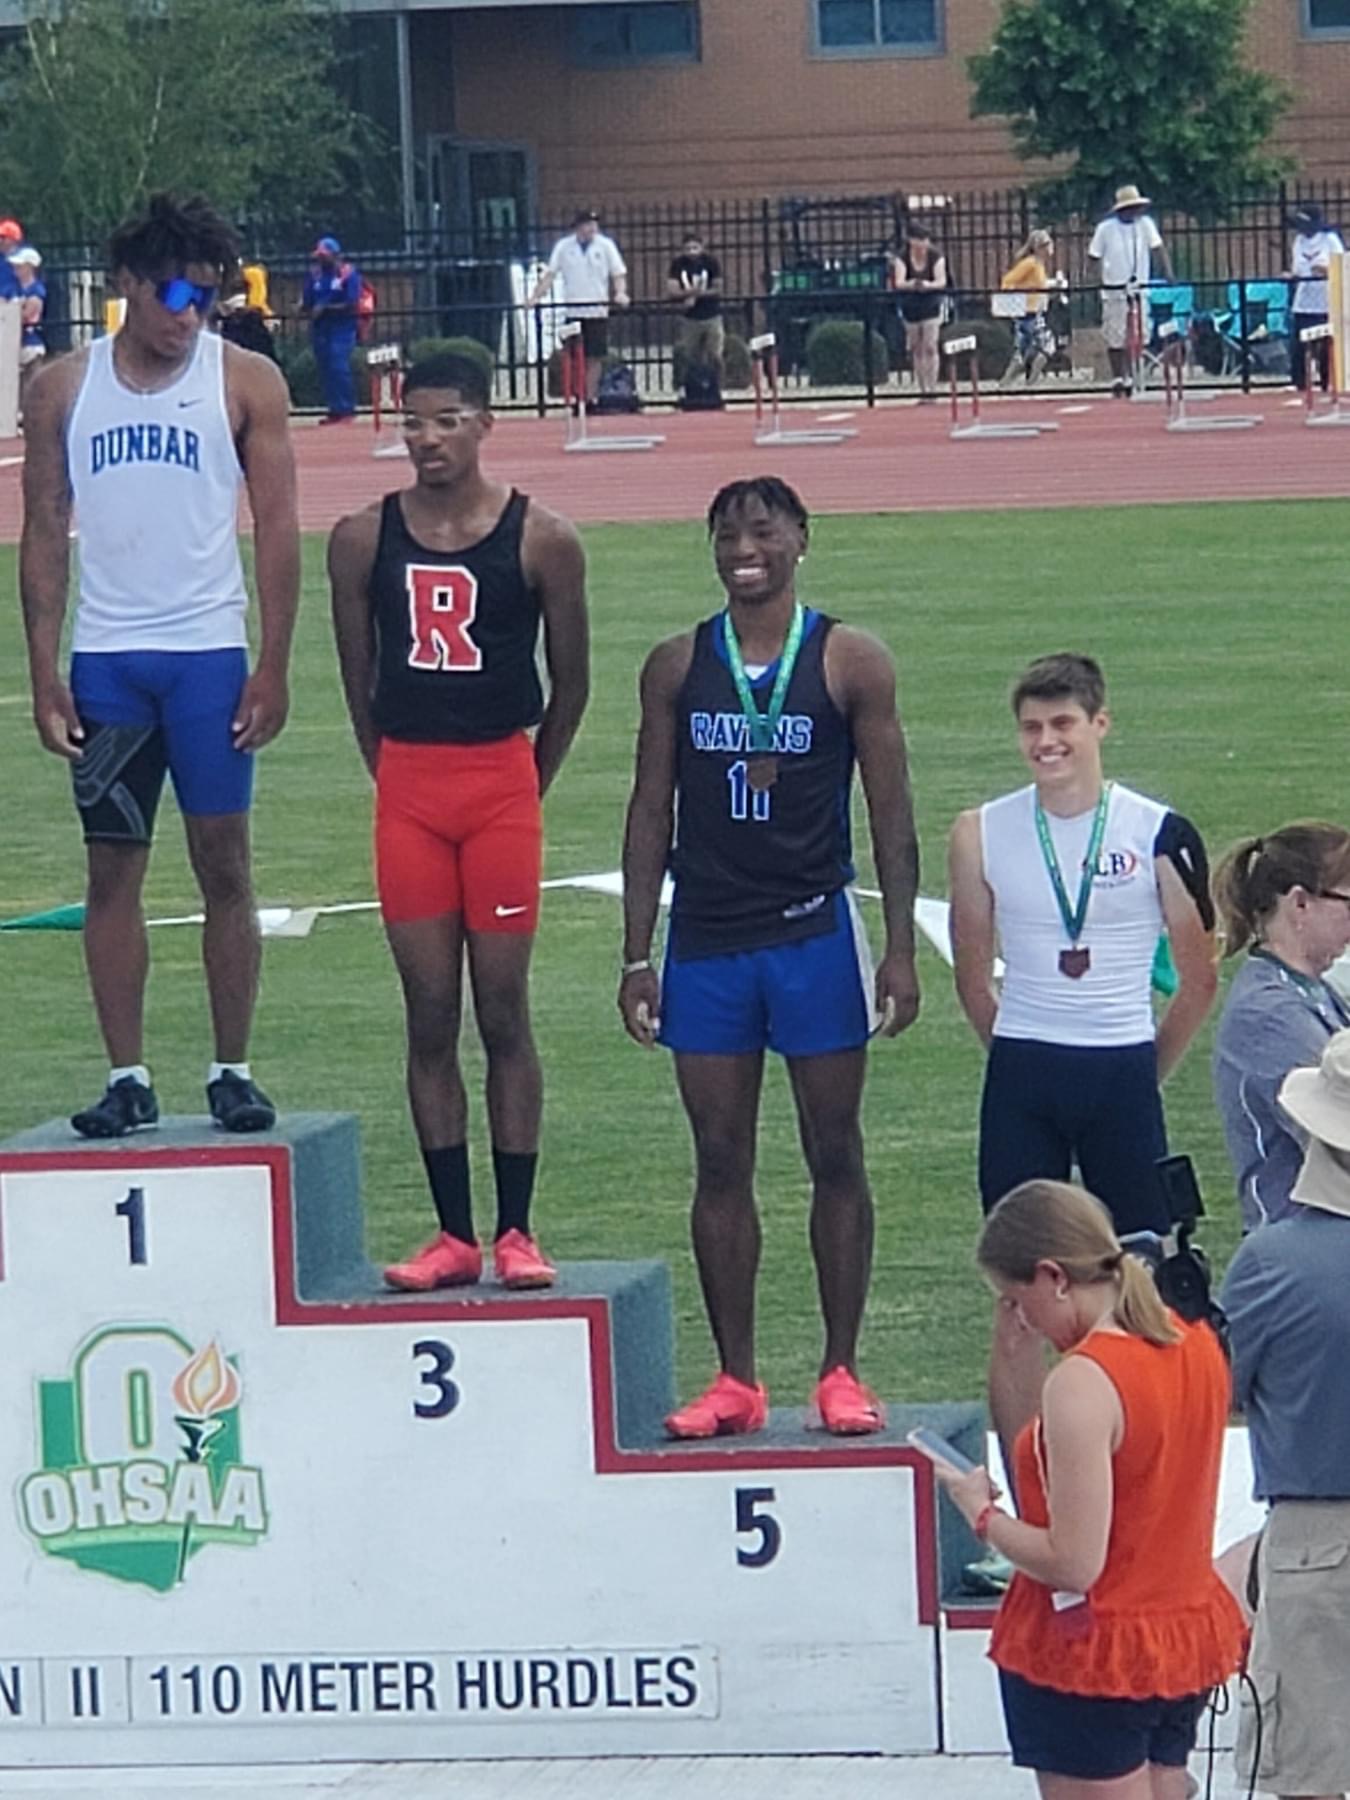 Pavel Henderson Ravenna High School Ravenna’s Pavel Henderson earned a spot on the podium with a 5th place finish in the 110 meter hurdles.